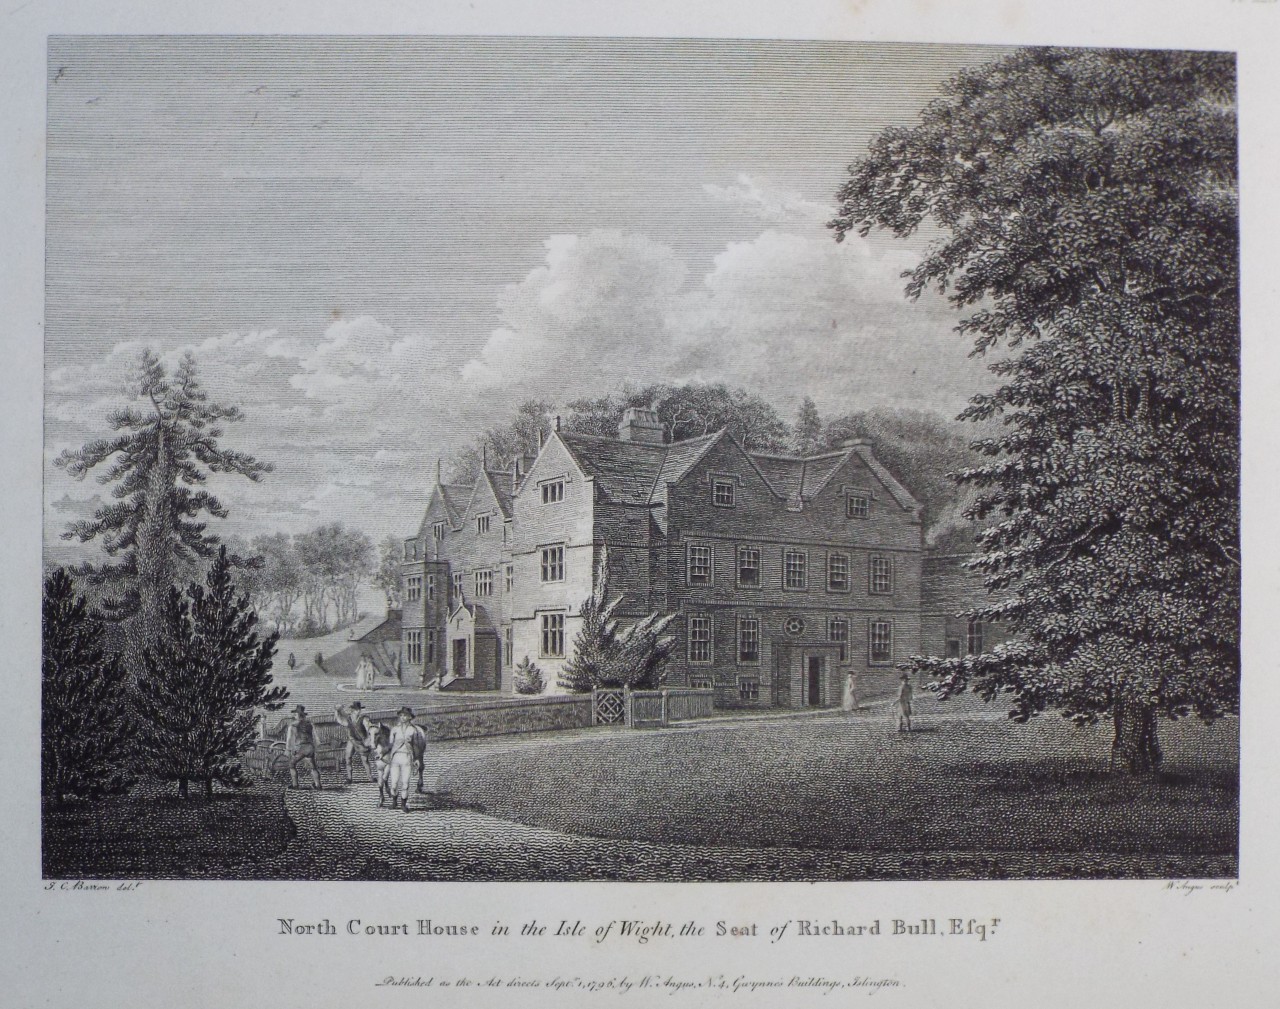 Print - North Court House in the Isle of Wight, the Seat of Richard Bull Esqr. - Angus